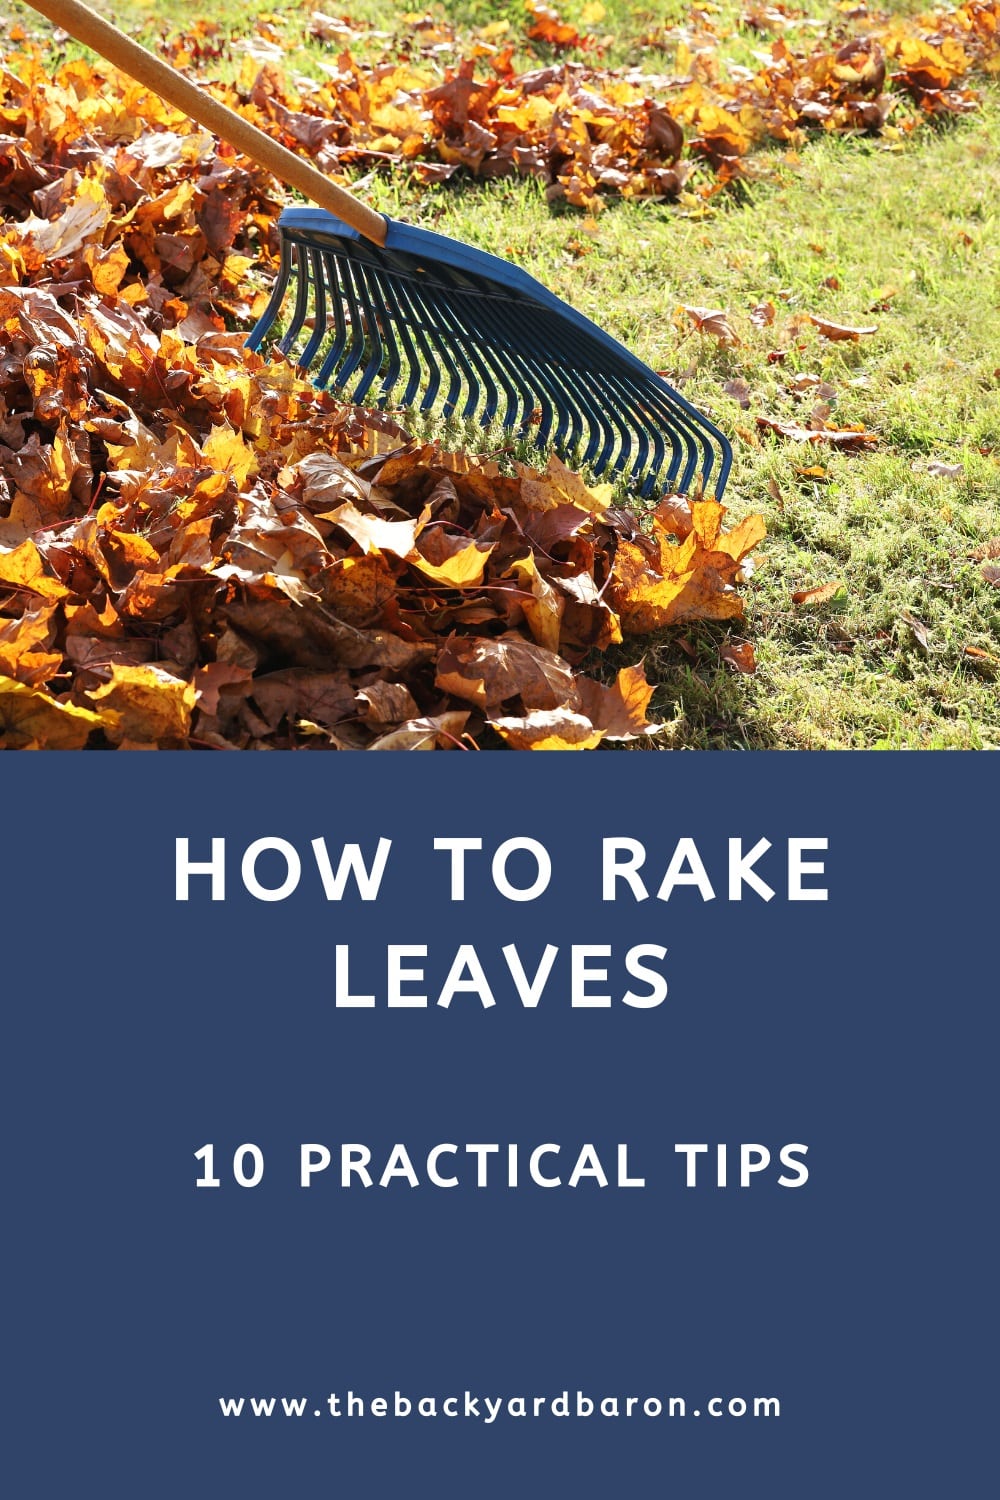 How to rake leaves (10 practical tips)